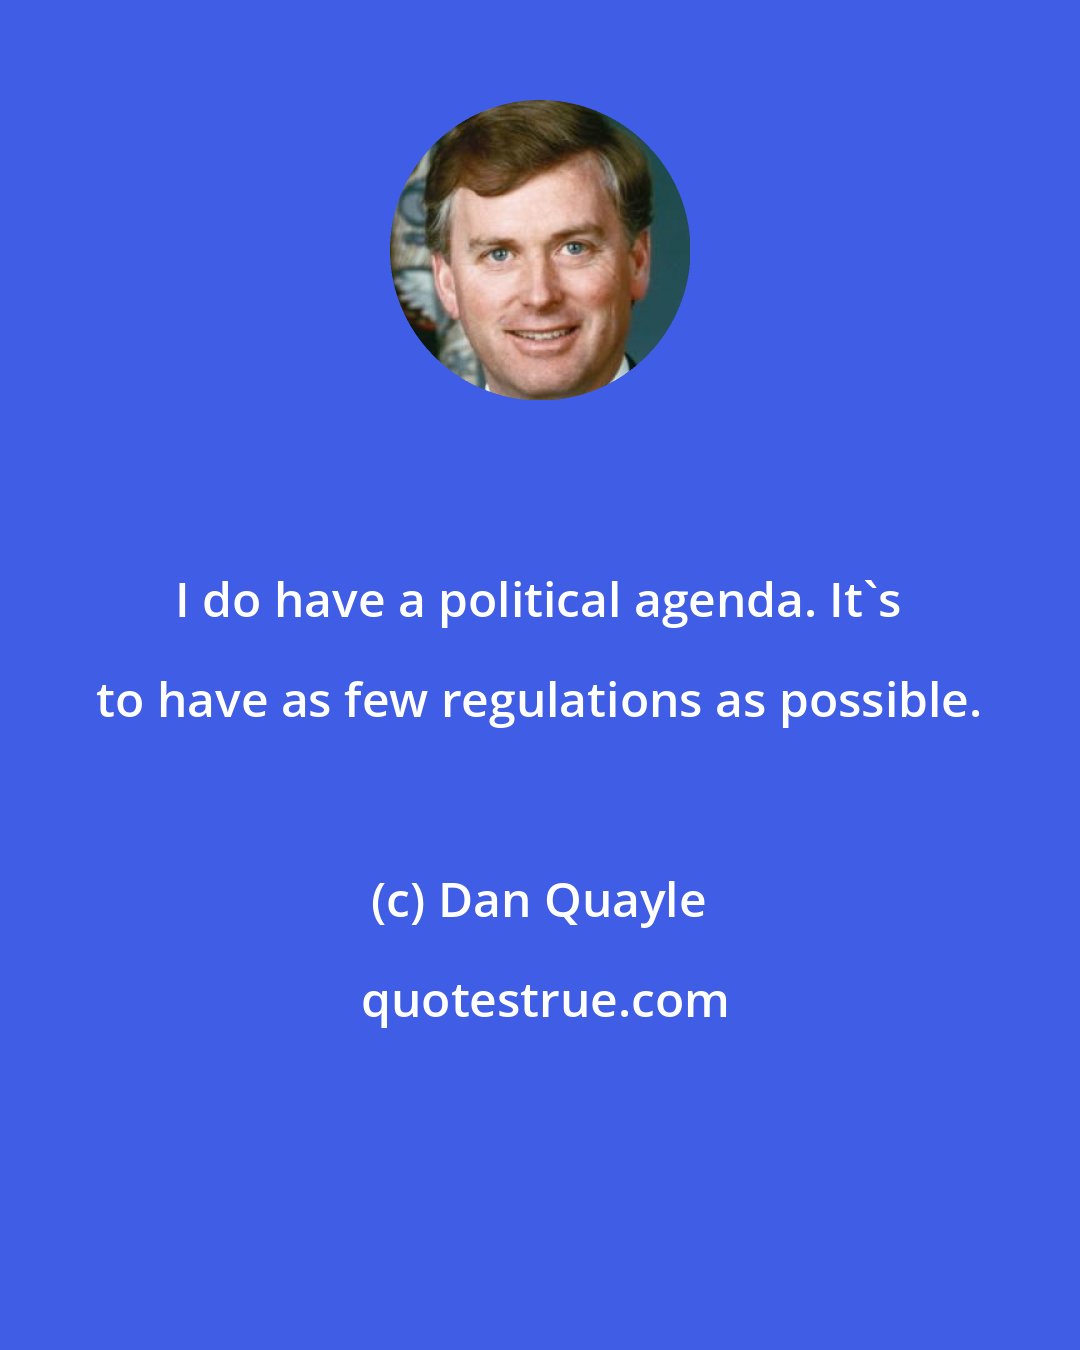 Dan Quayle: I do have a political agenda. It's to have as few regulations as possible.